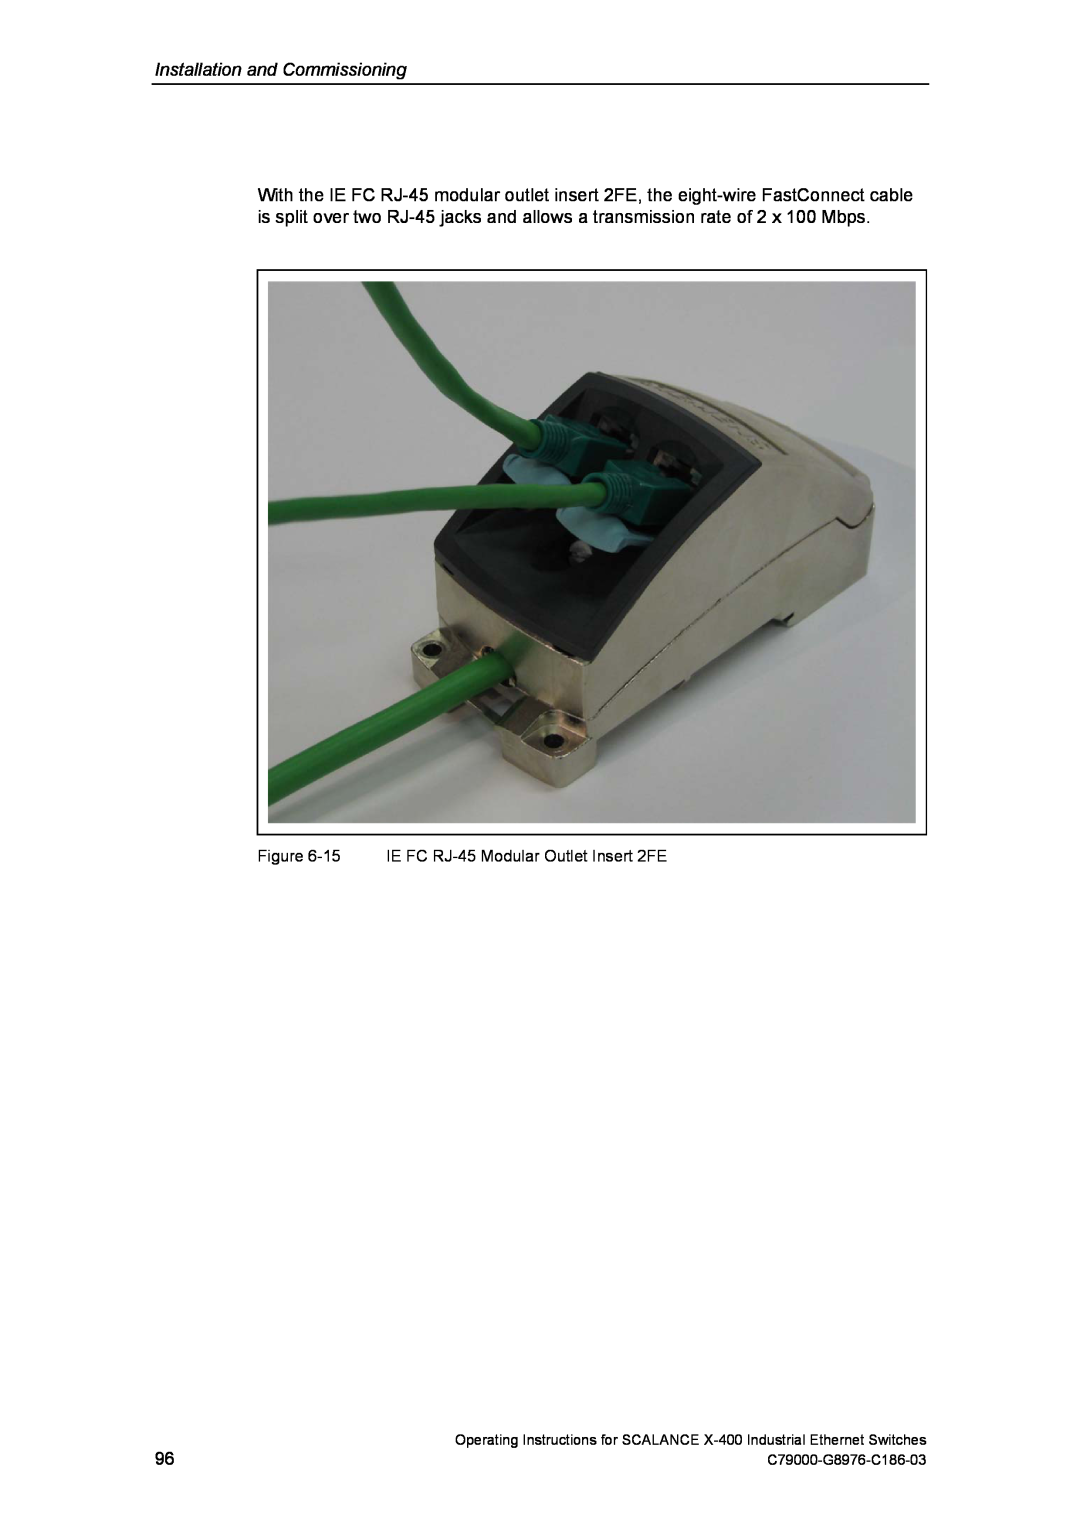 Siemens X-400 Installation and Commissioning, 15 IE FC RJ-45 Modular Outlet Insert 2FE, C79000-G8976-C186-03 